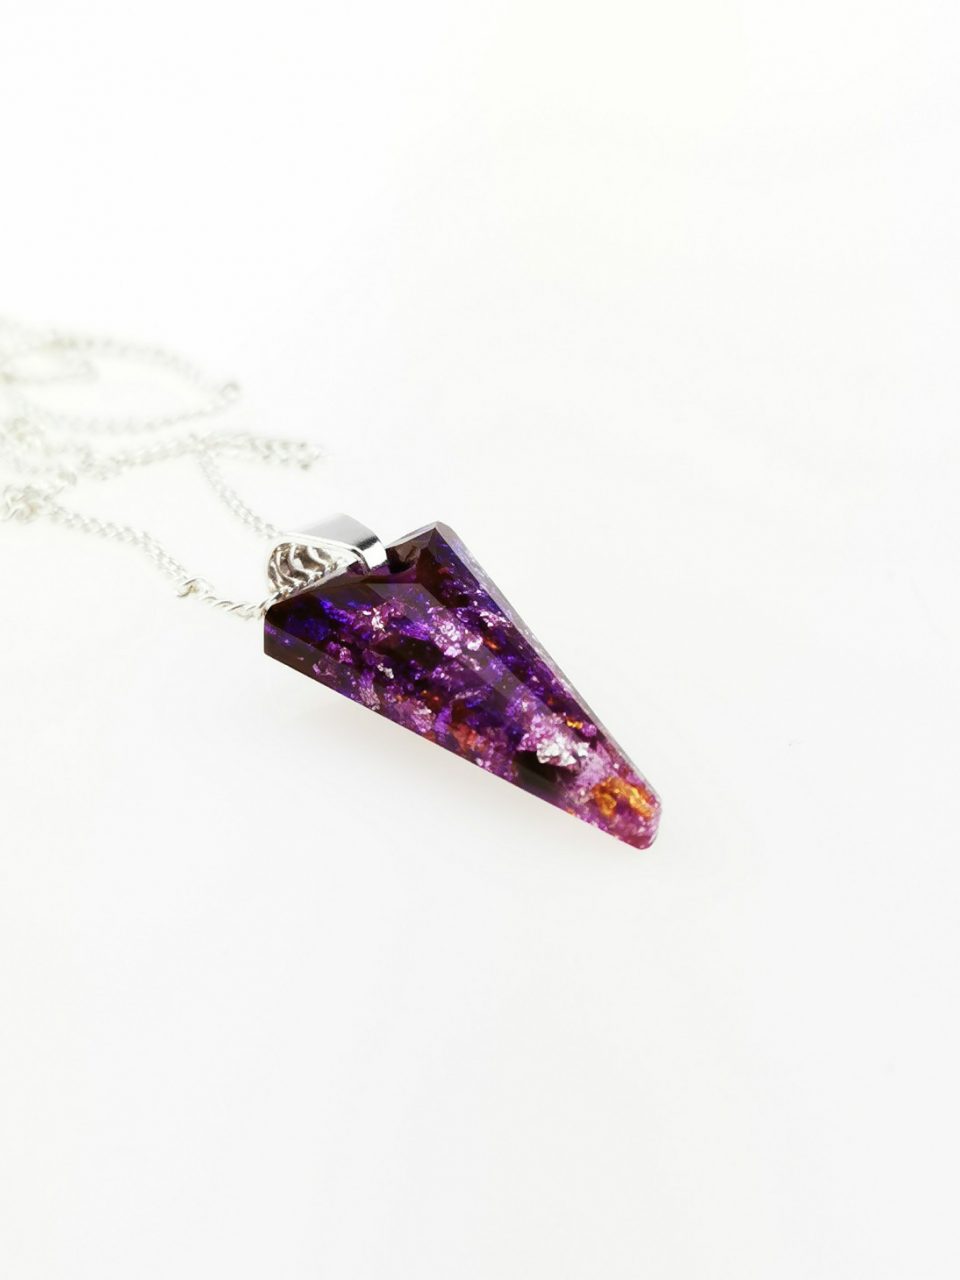 Small Violet Spike Orgone Crystal Pendant by OrgoneVibes